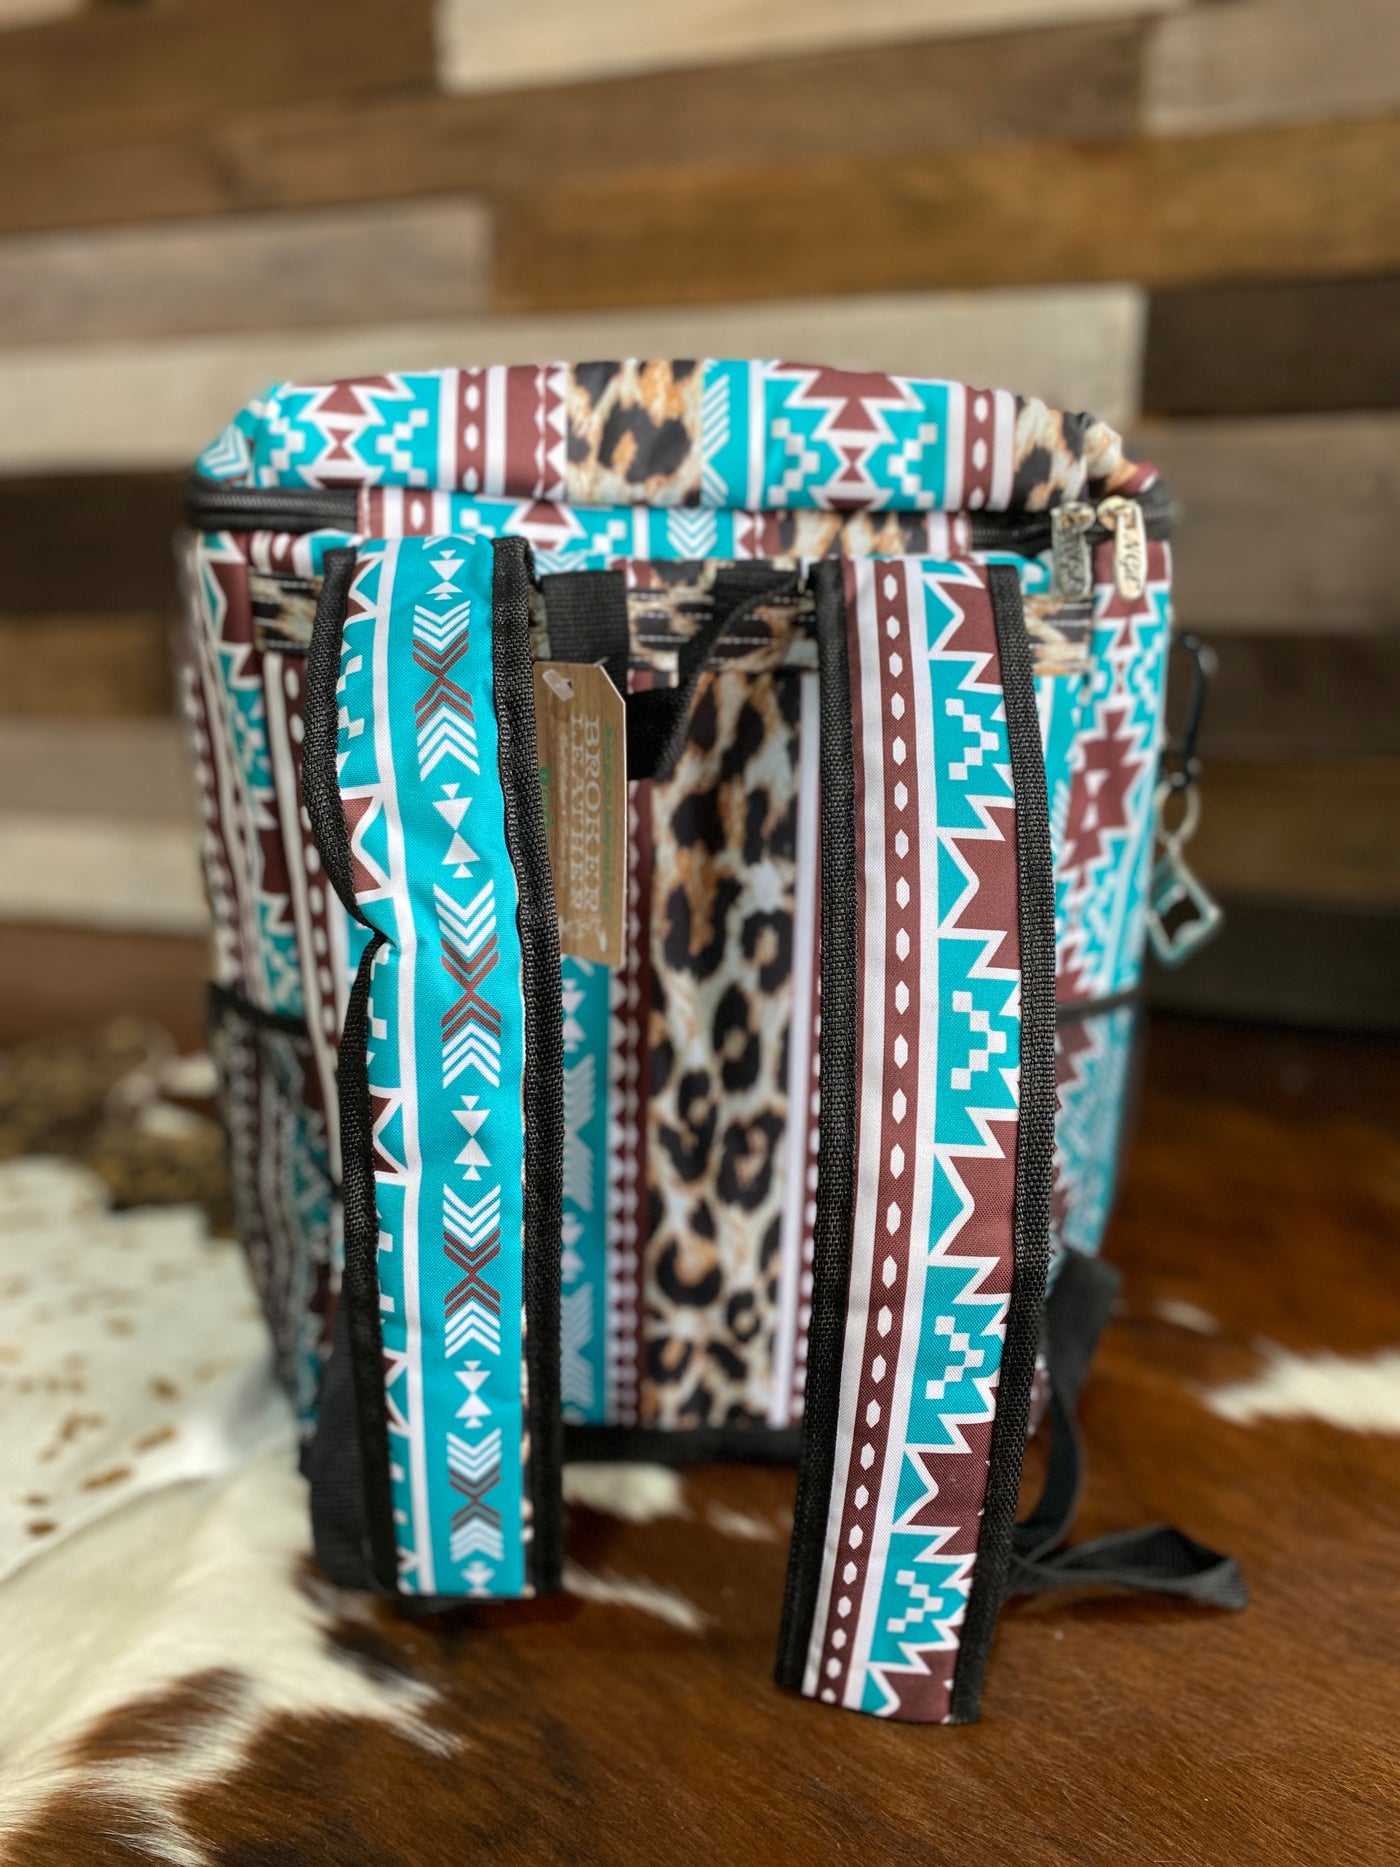 Maria Cow Print & Aztec Insulated Backpack Cooler ✜ON SALE NOW✜